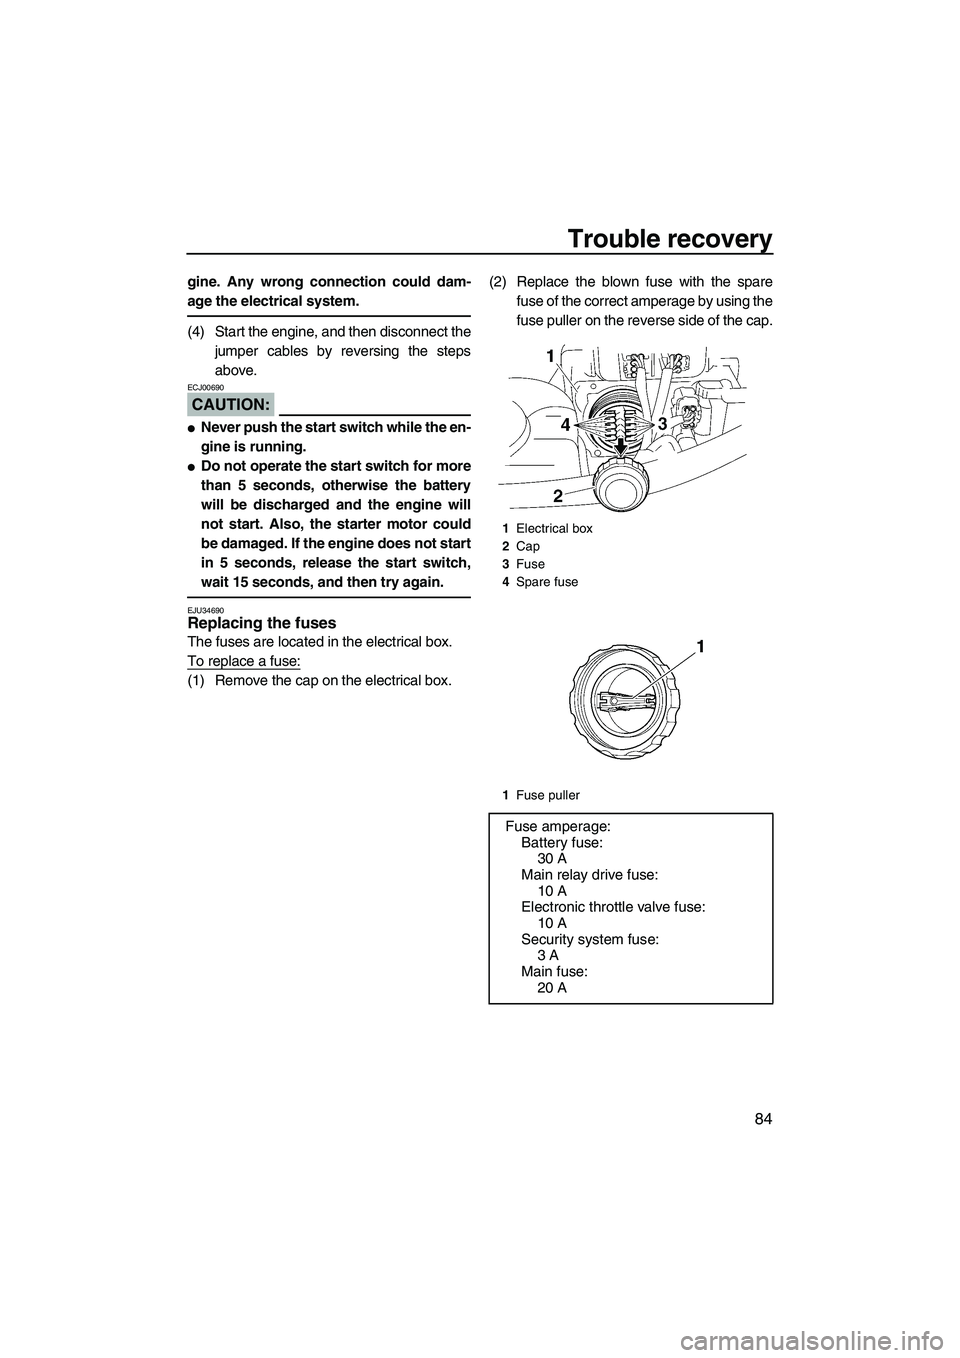 YAMAHA VX SPORT 2007  Owners Manual Trouble recovery
84
gine. Any wrong connection could dam-
age the electrical system.
(4) Start the engine, and then disconnect the
jumper cables by reversing the steps
above.
CAUTION:
ECJ00690
Never 